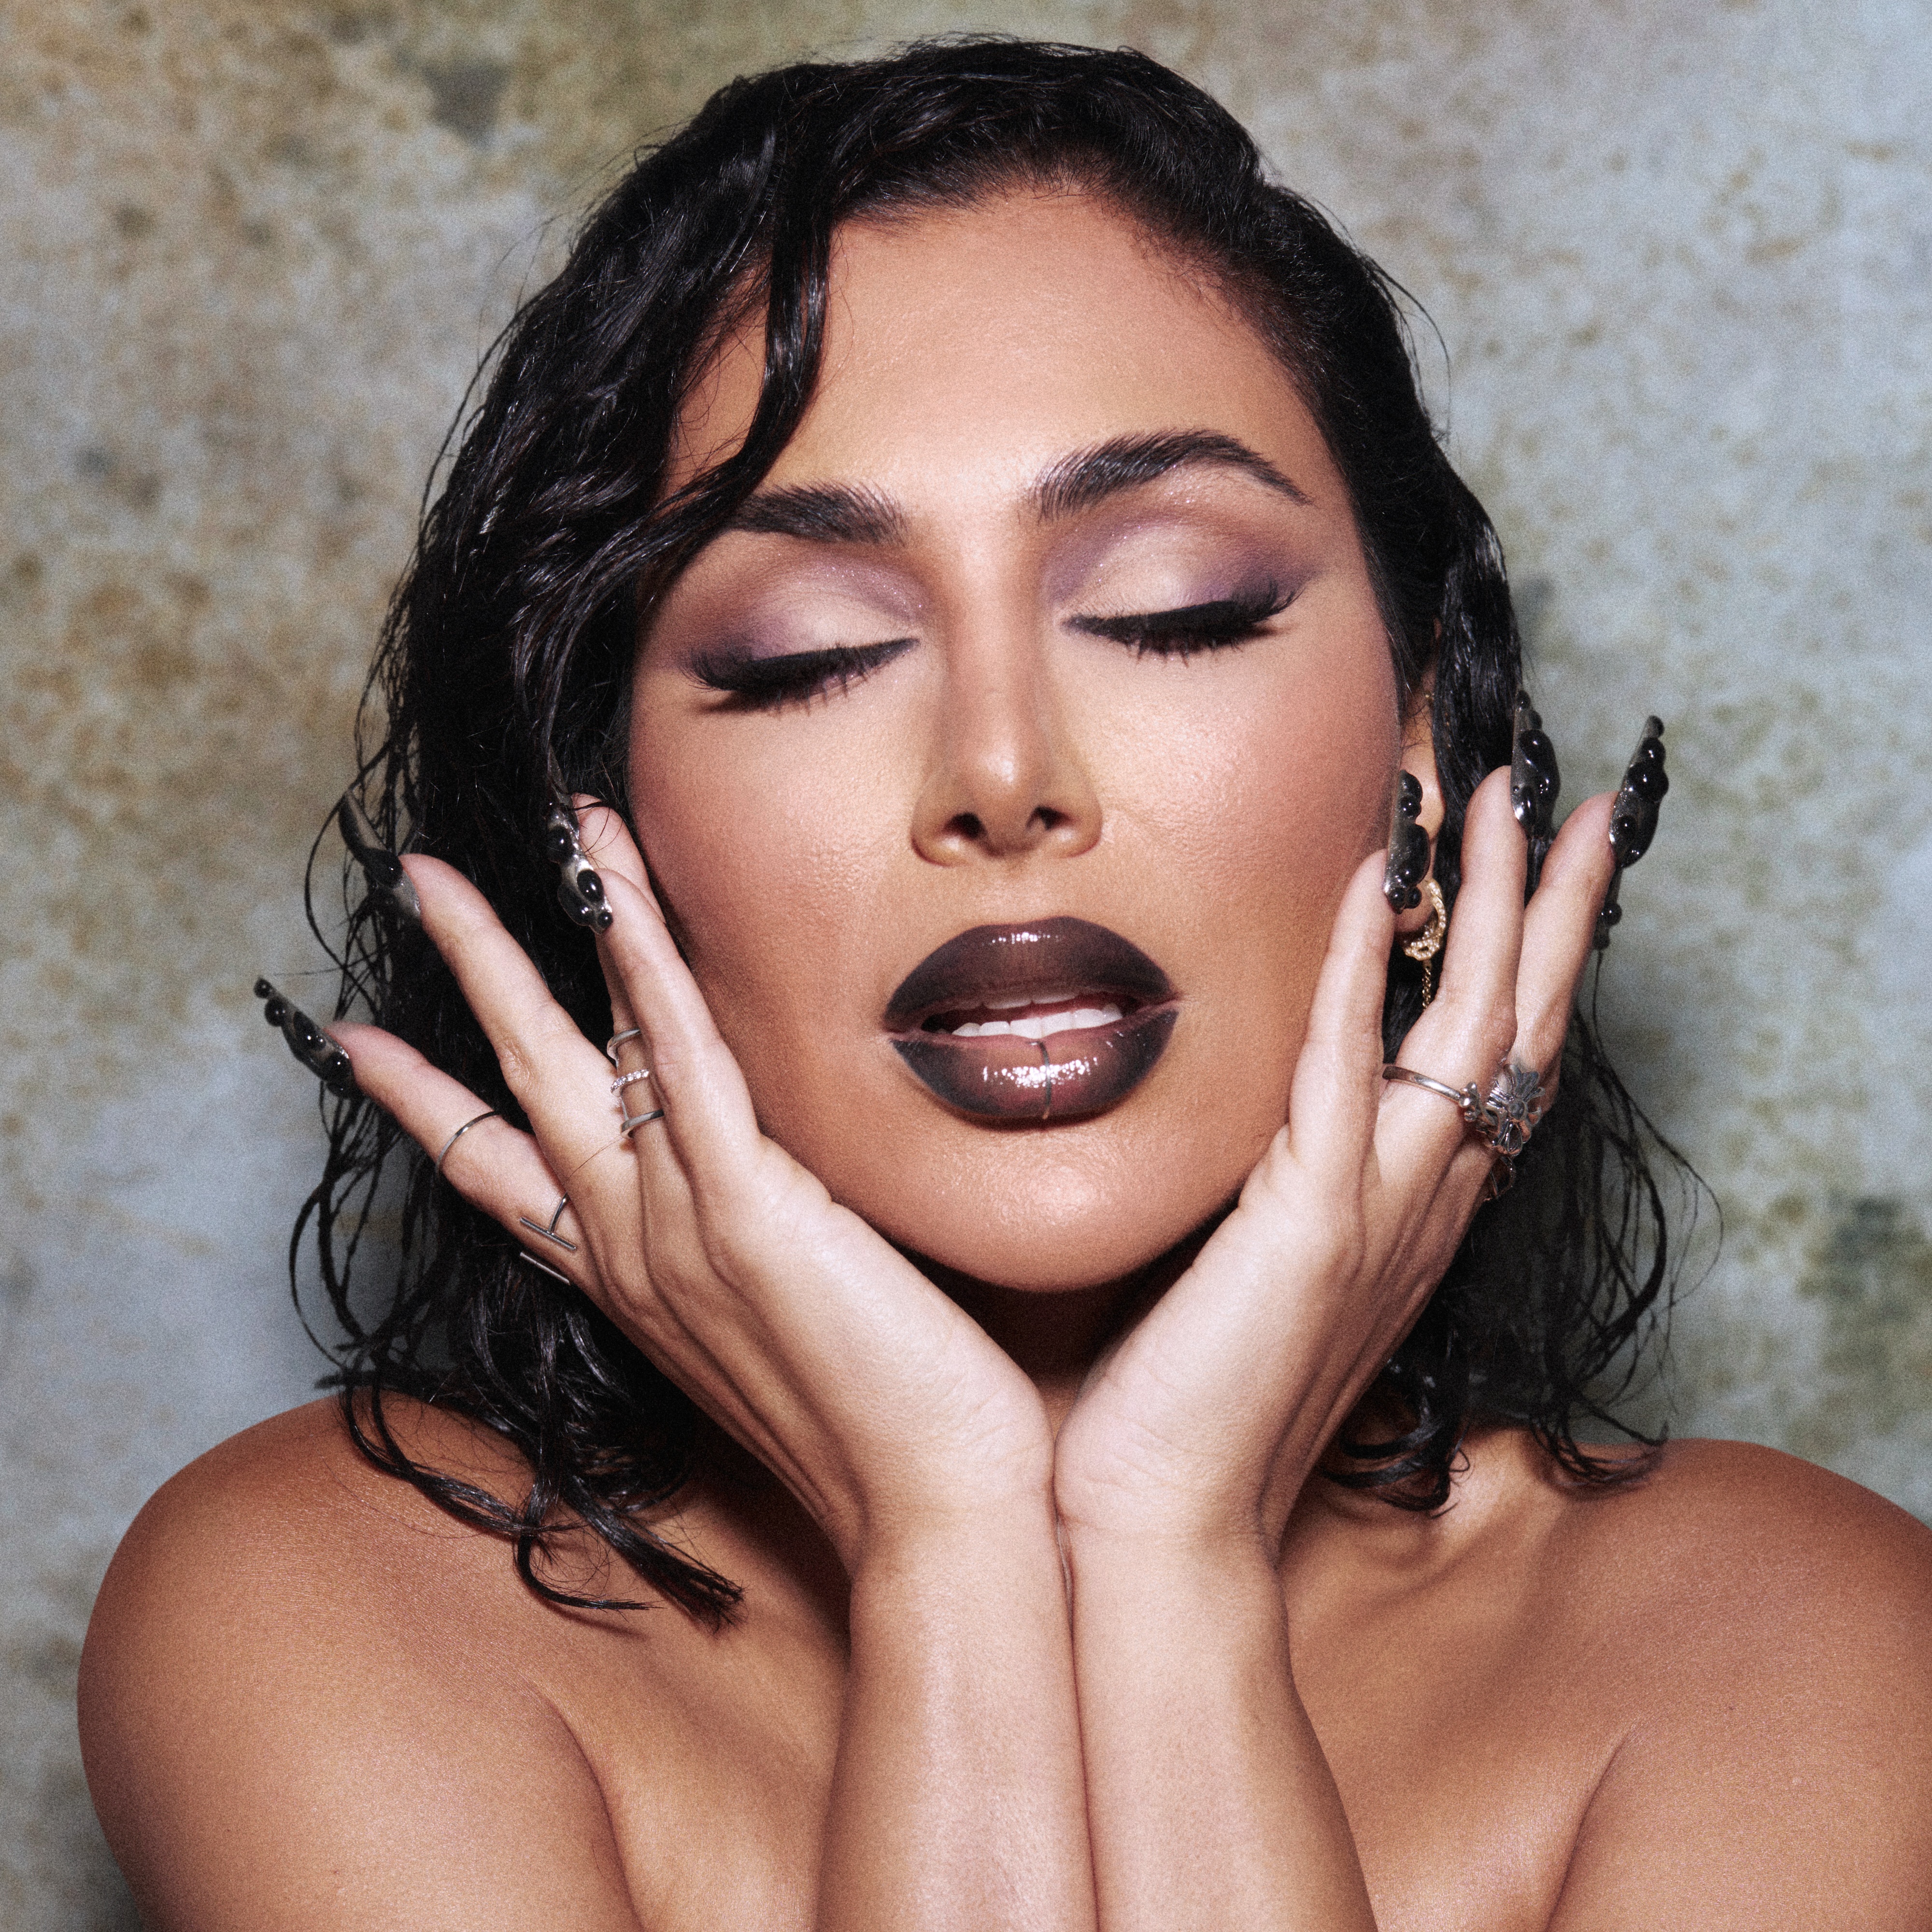 Huda Beauty Pretty Grunge Has Launched - Here's The Scoop